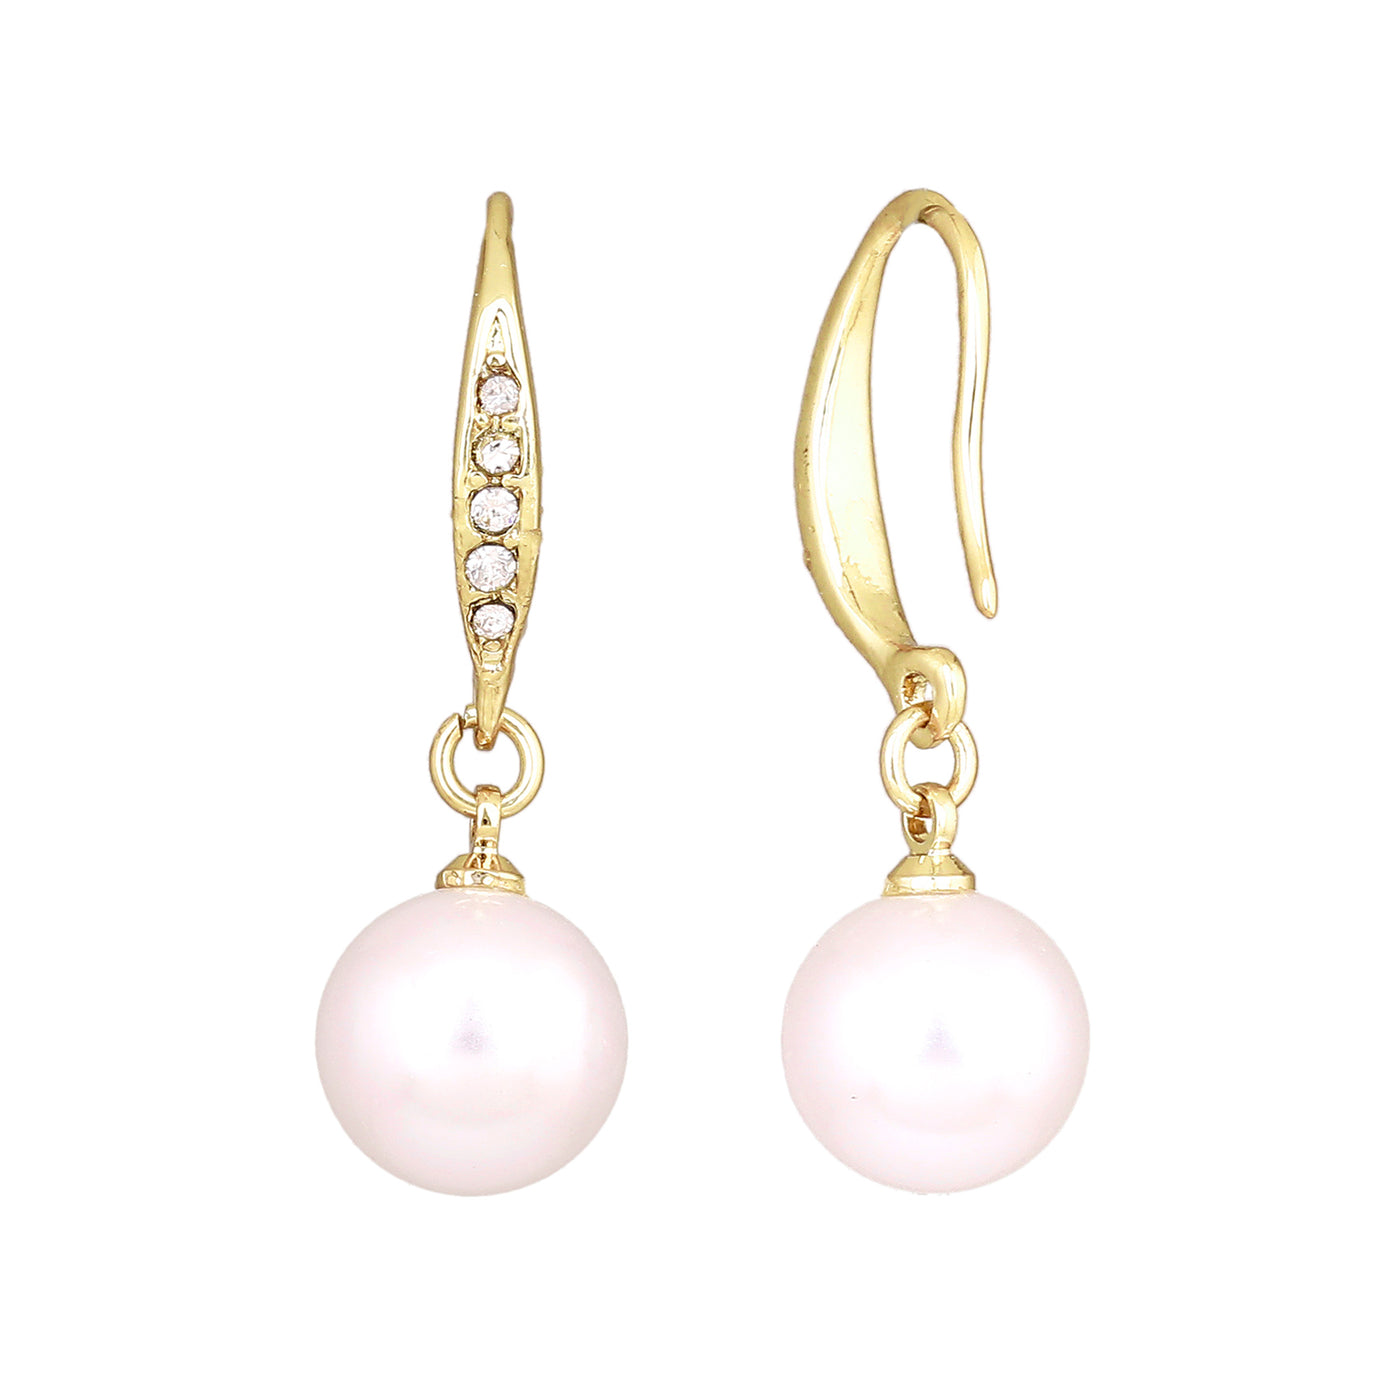 Estele Gold Plated Enchanting Pearl Drop Earrings With Crystal for Girls/Women